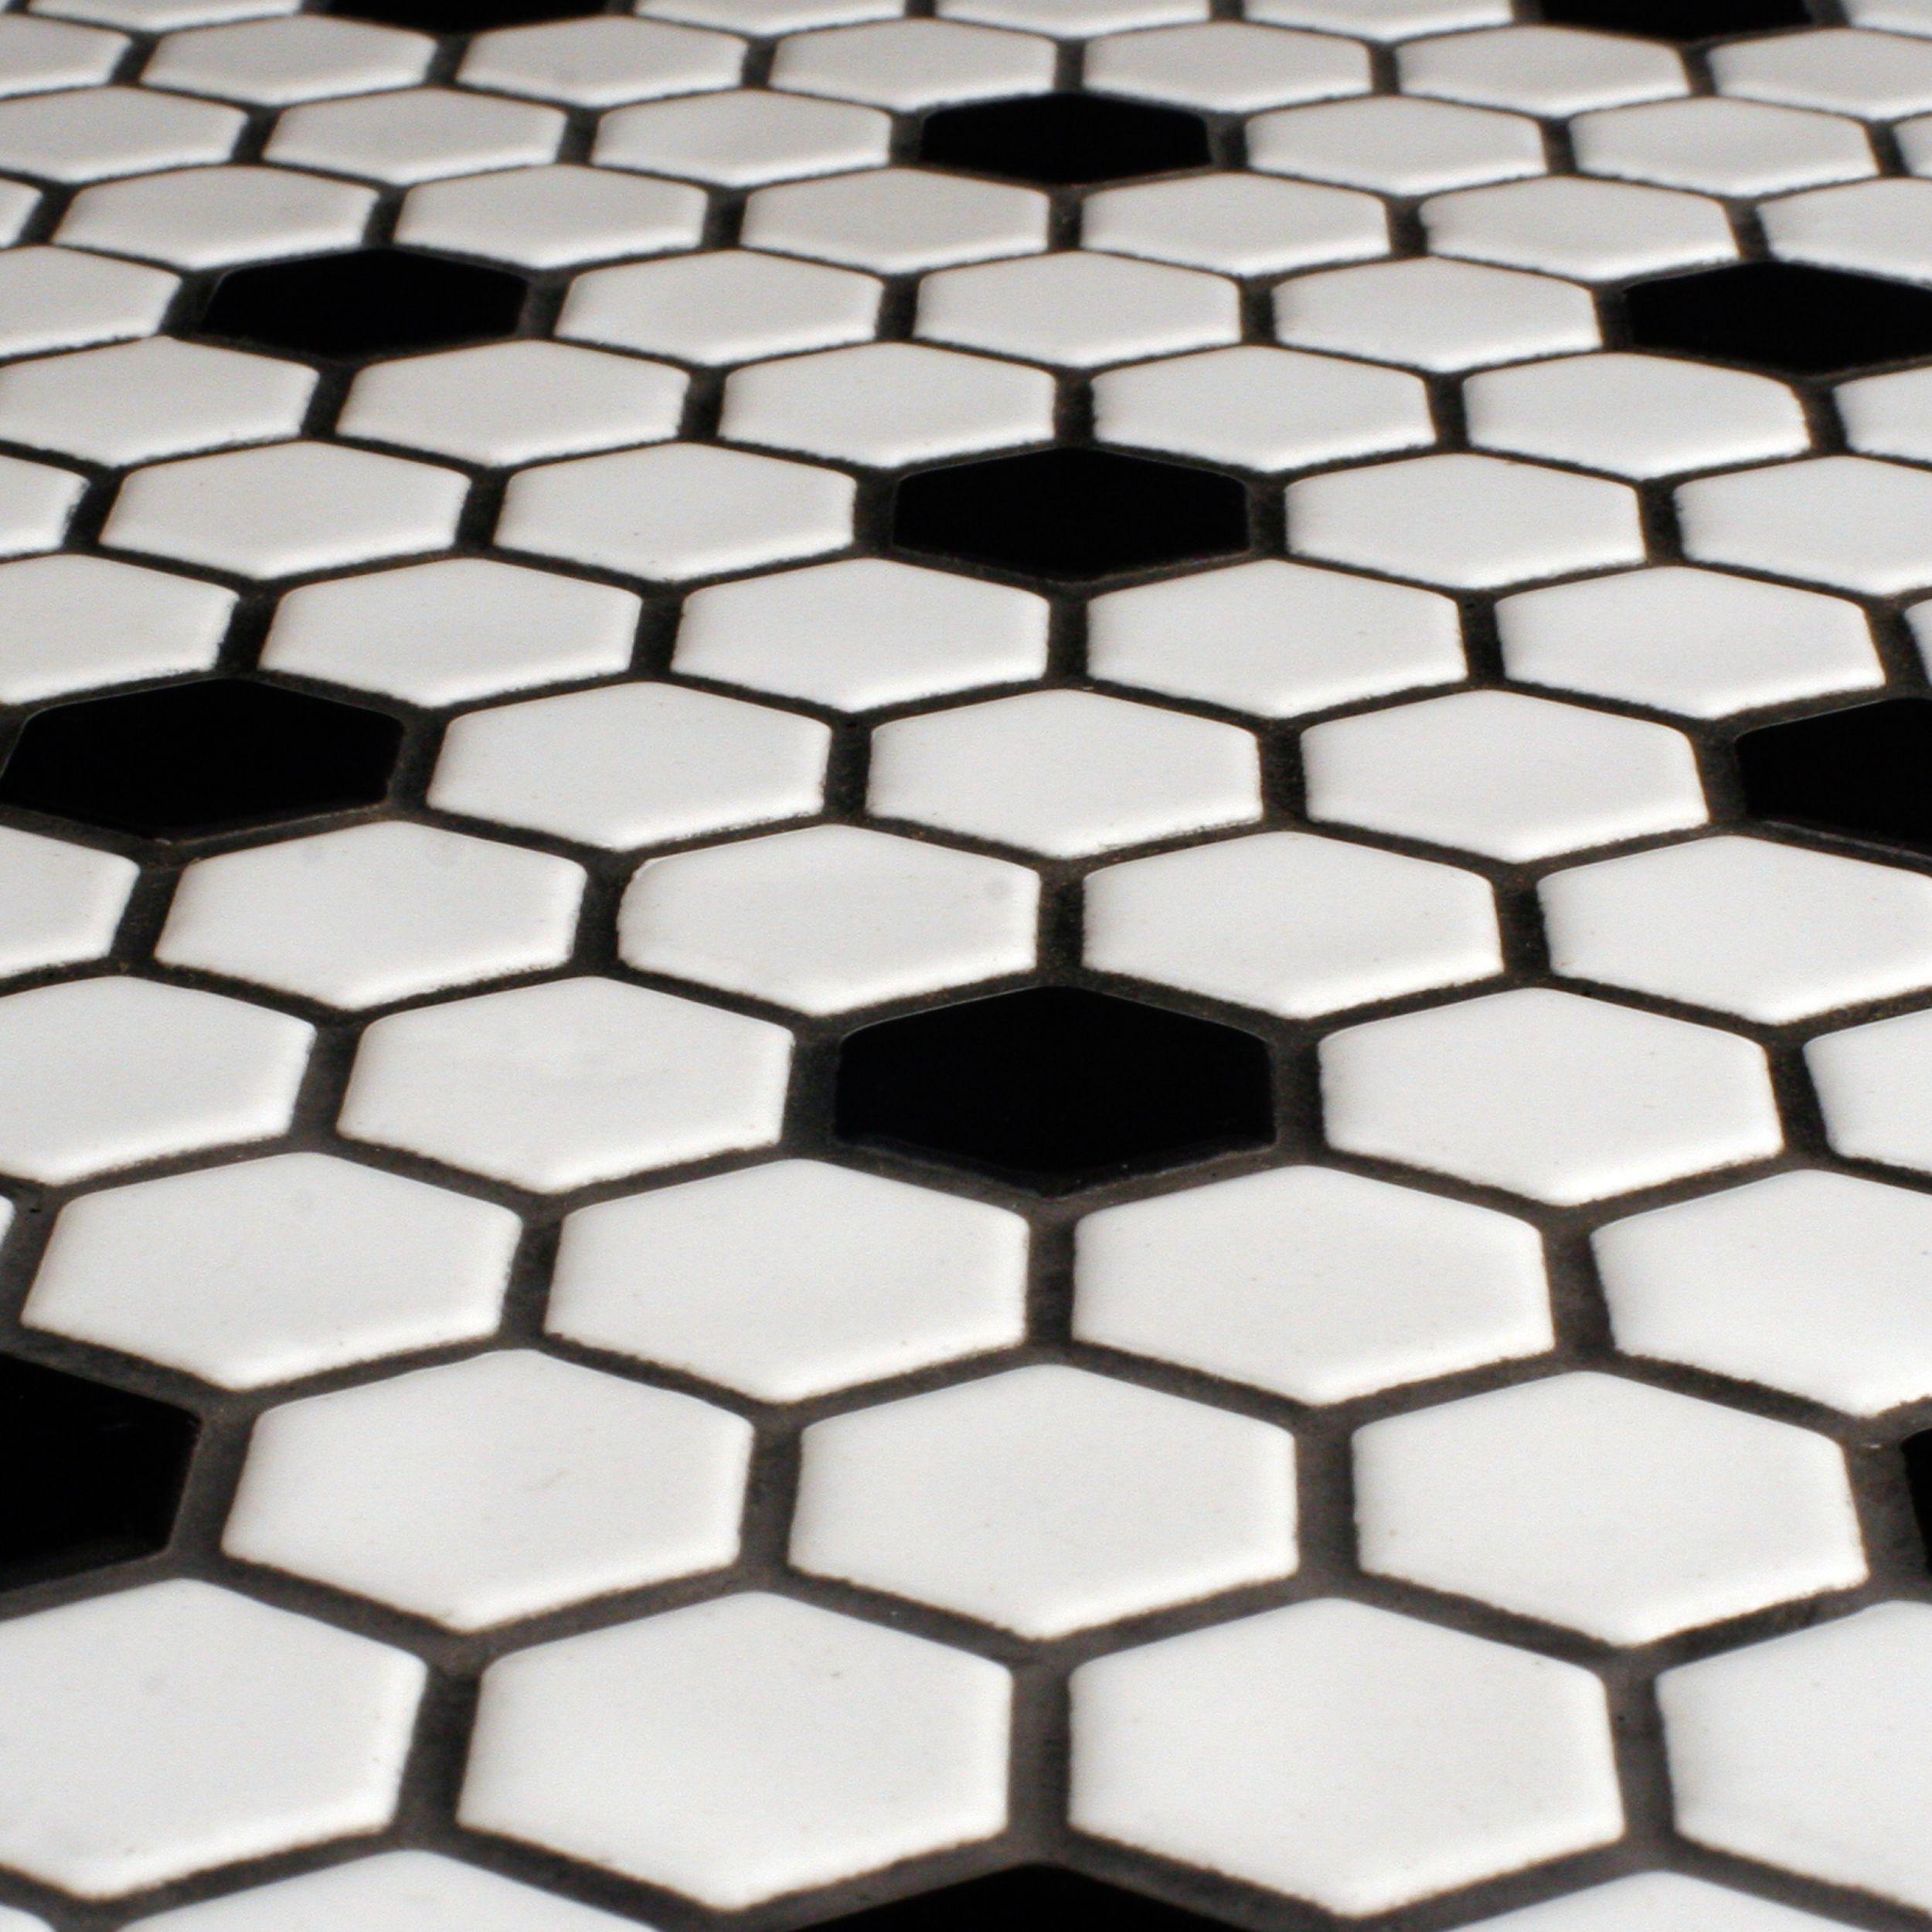 Black and White Hex Logo - Glazed #hexagon #tile with black hex accents were also #popular